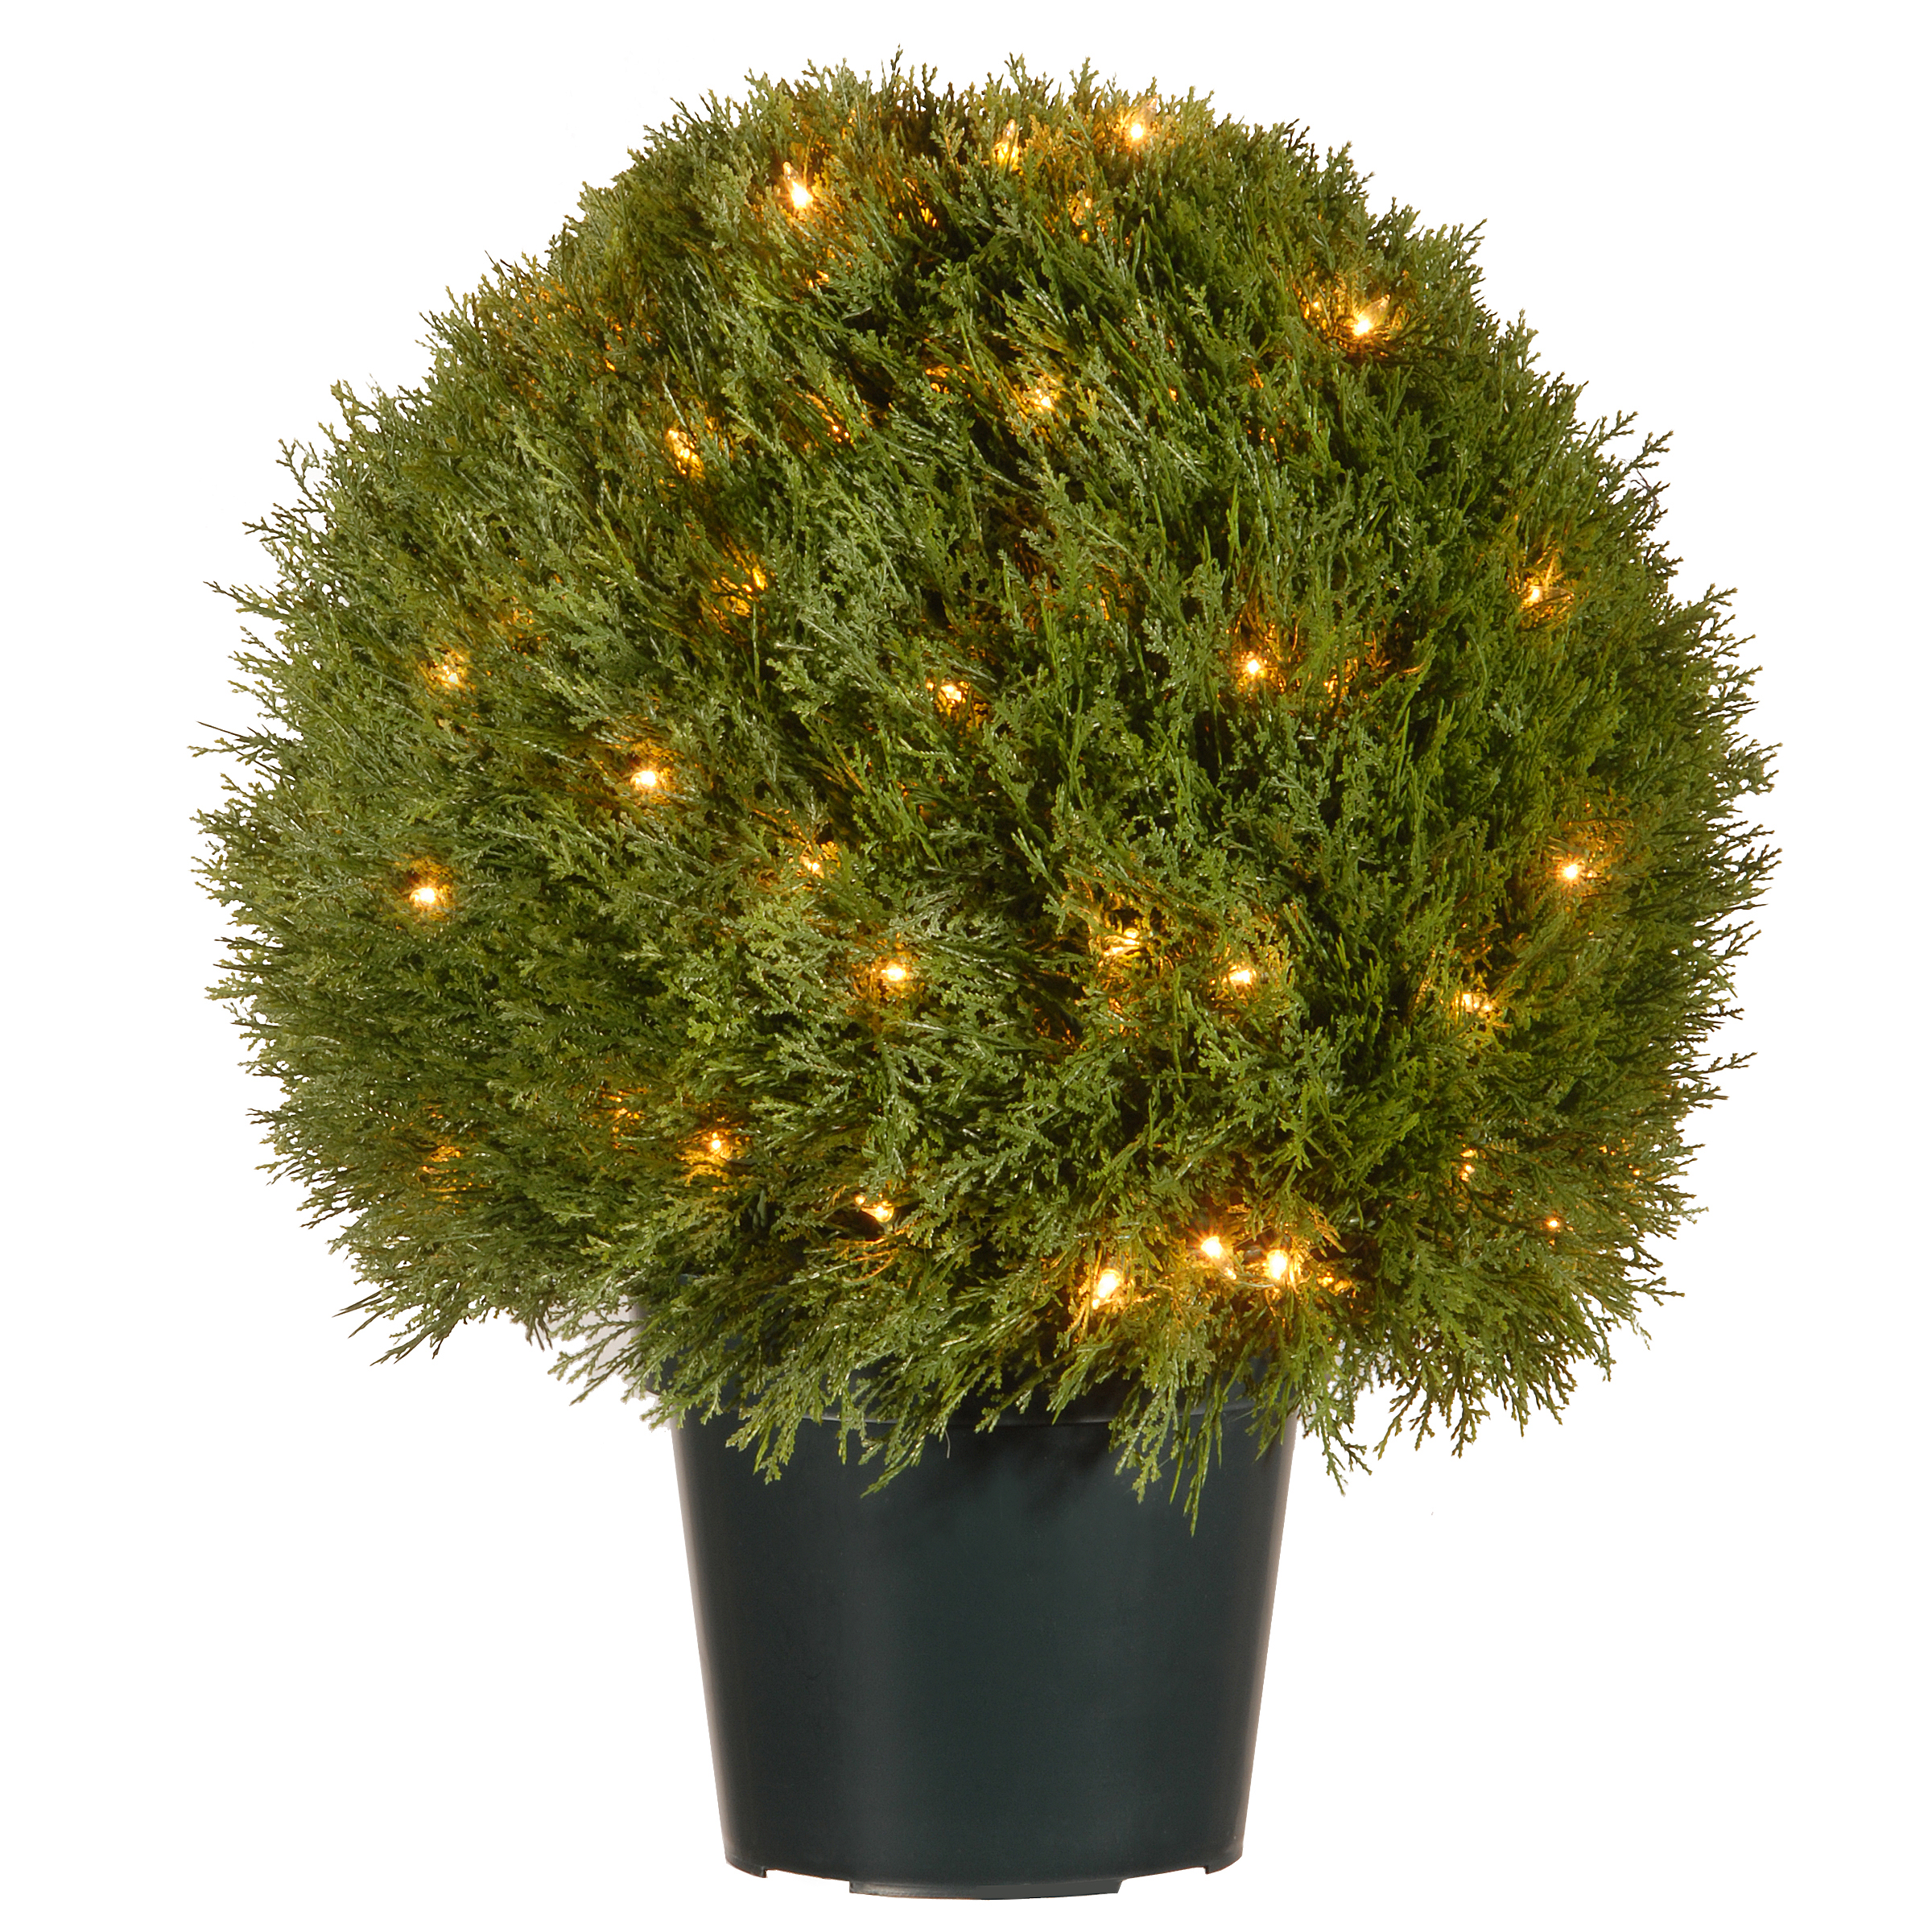 24" Pine Topiary in Round Green Growers Pot - Clear Lights - image 1 of 3